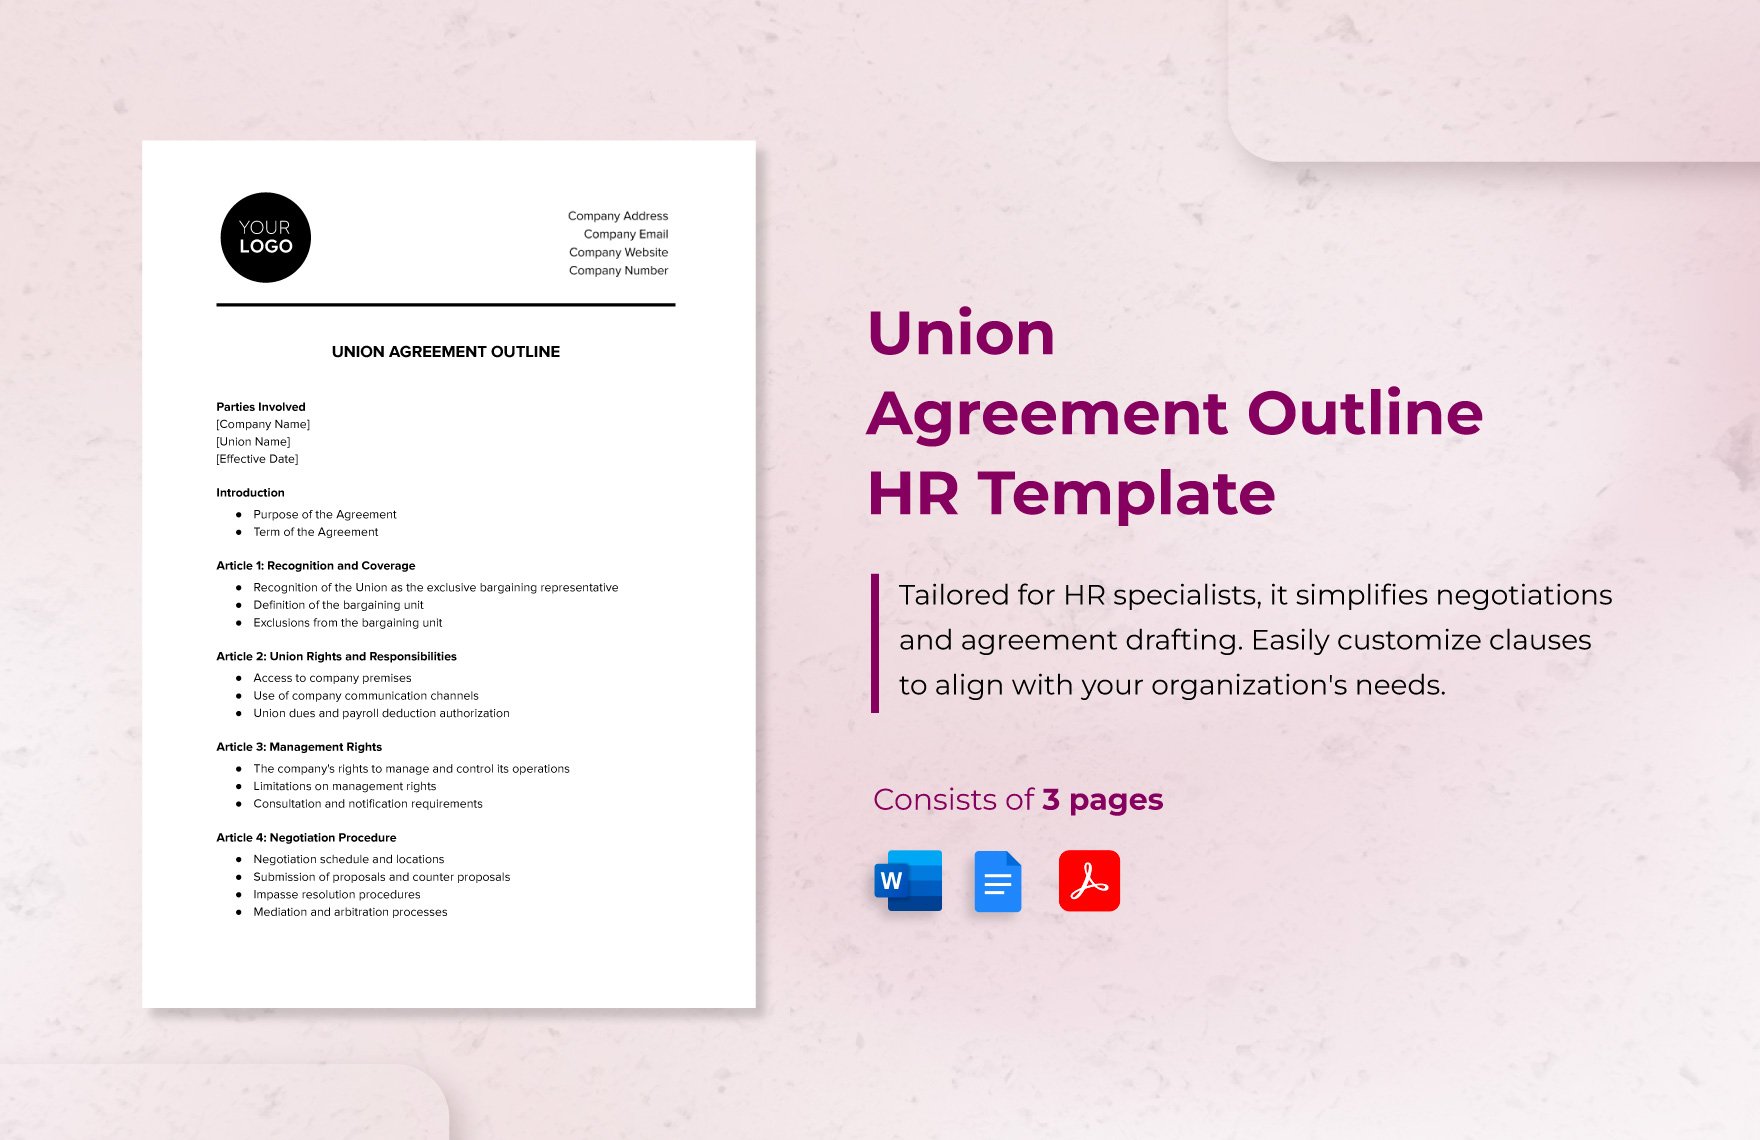 Union Agreement Outline HR Template in Word, Google Docs, PDF